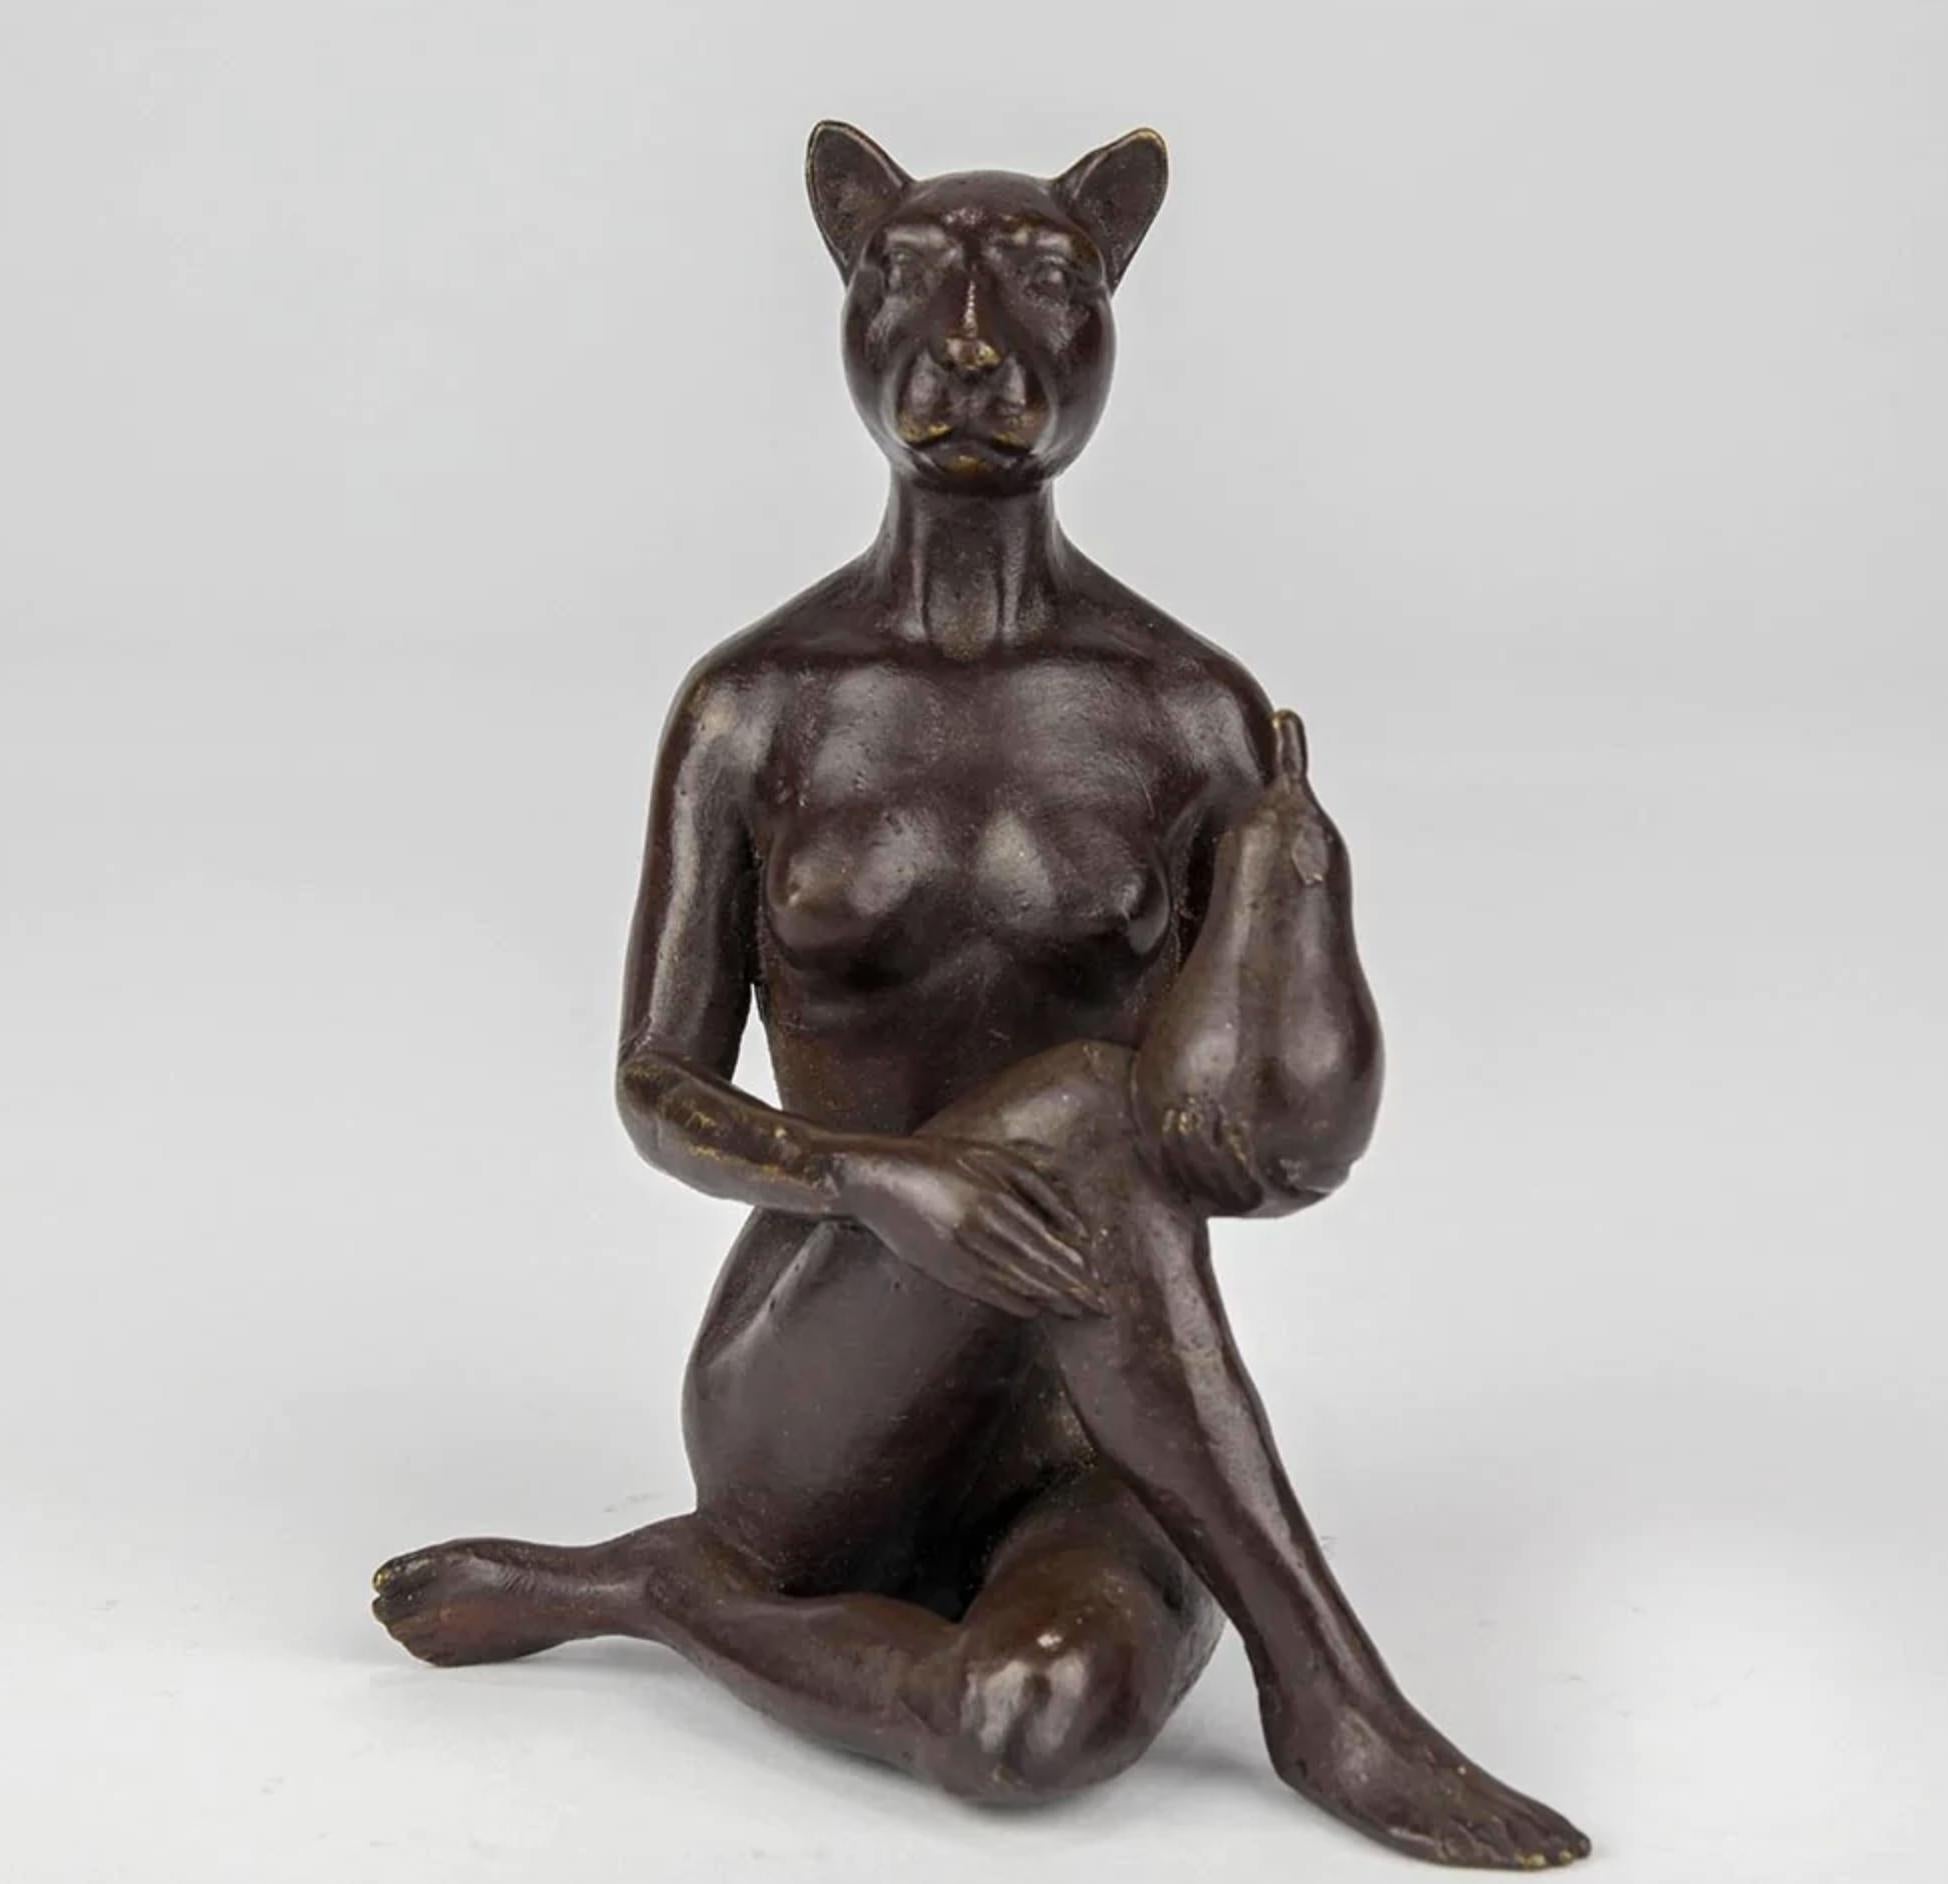 Title: The Pearfect Cat
Authentic bronze sculpture

This authentic bronze sculpture titled 'The Pearfect Cat' by artists Gillie and Marc has been meticulously crafted in bronze. It features Gillie and Marcs catwoman sitting while holding a pear